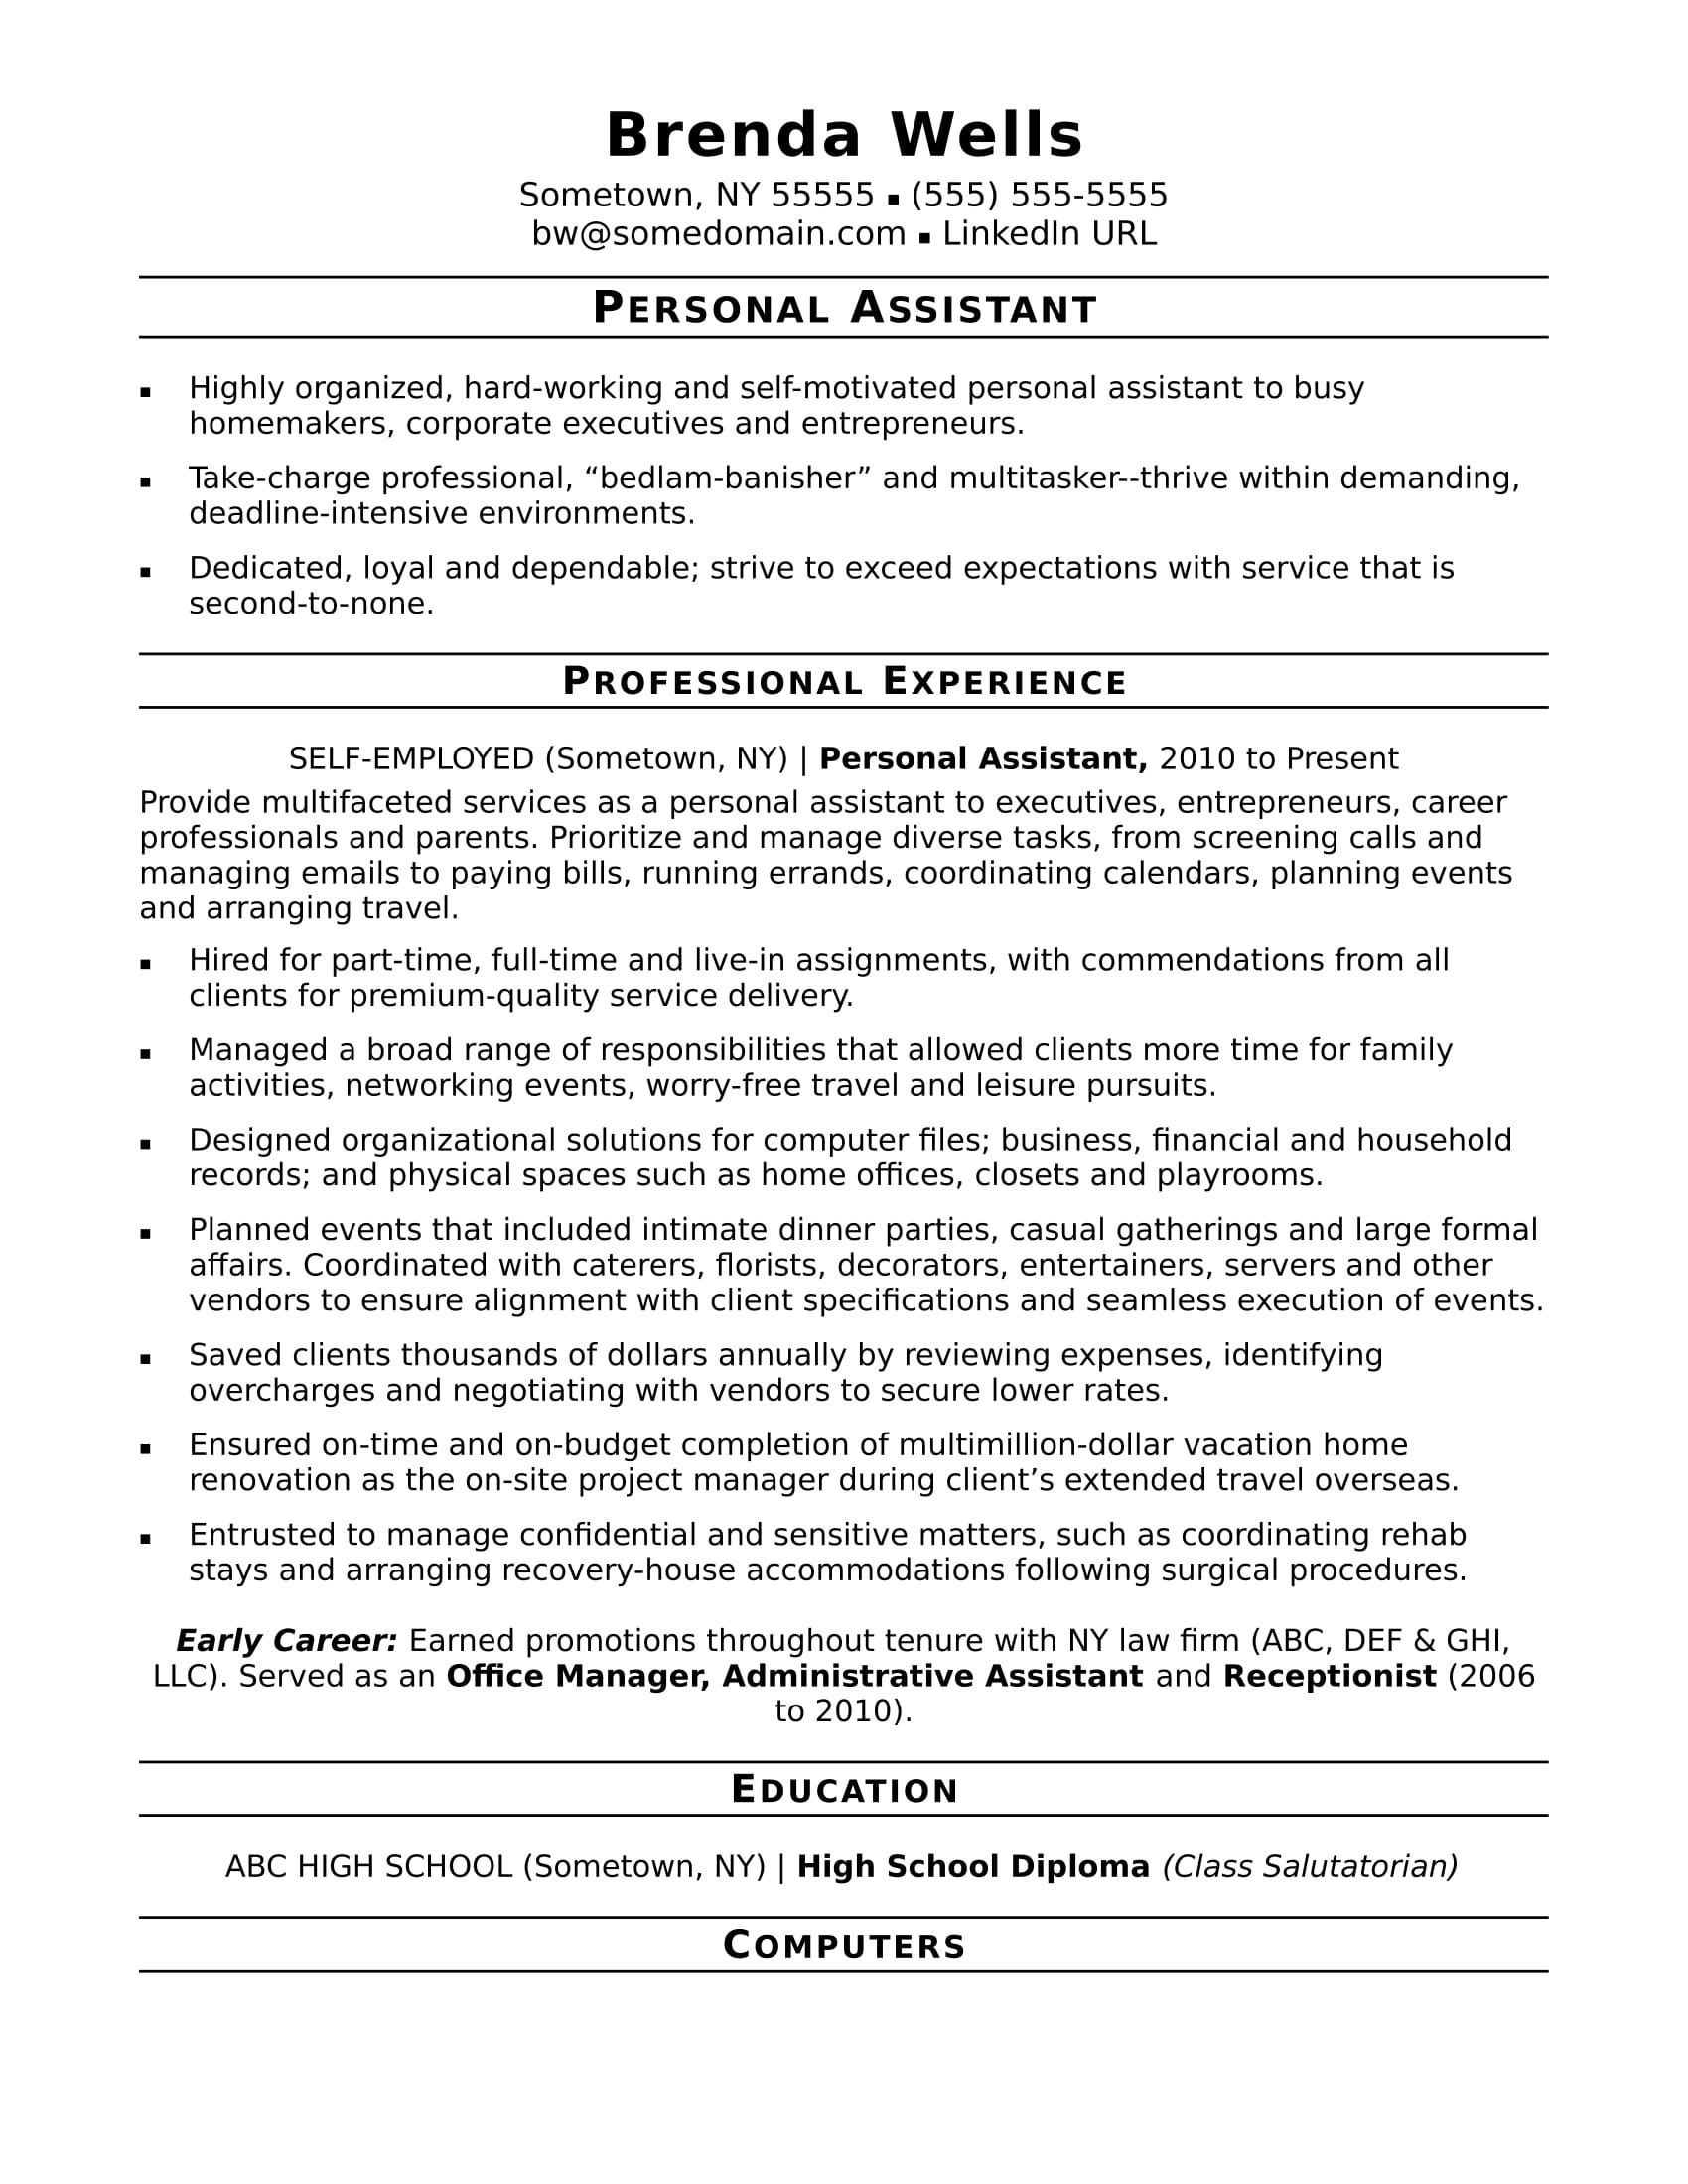 Professional Family Owned Resume Summary Sample Personal assistant Resume Monster.com